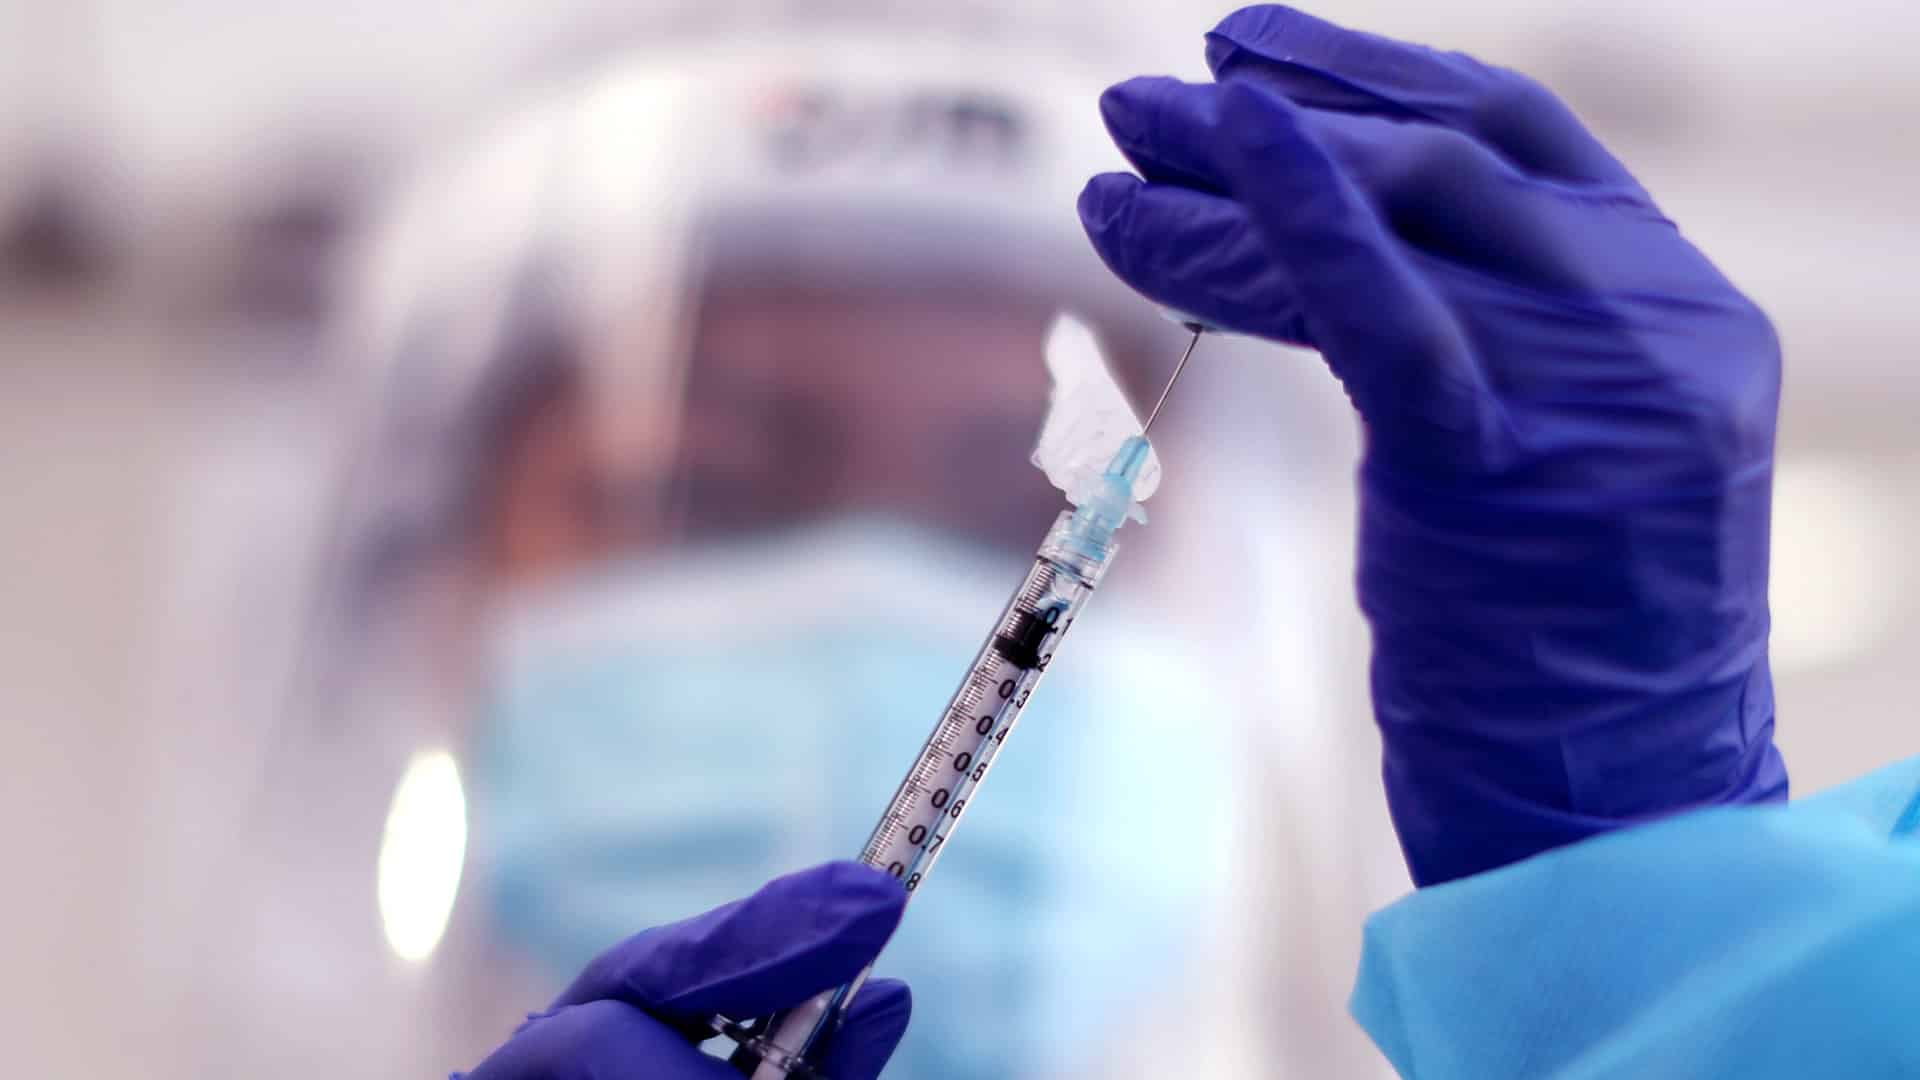 Google says its Multitask Unified Model helped improve vaccine search results